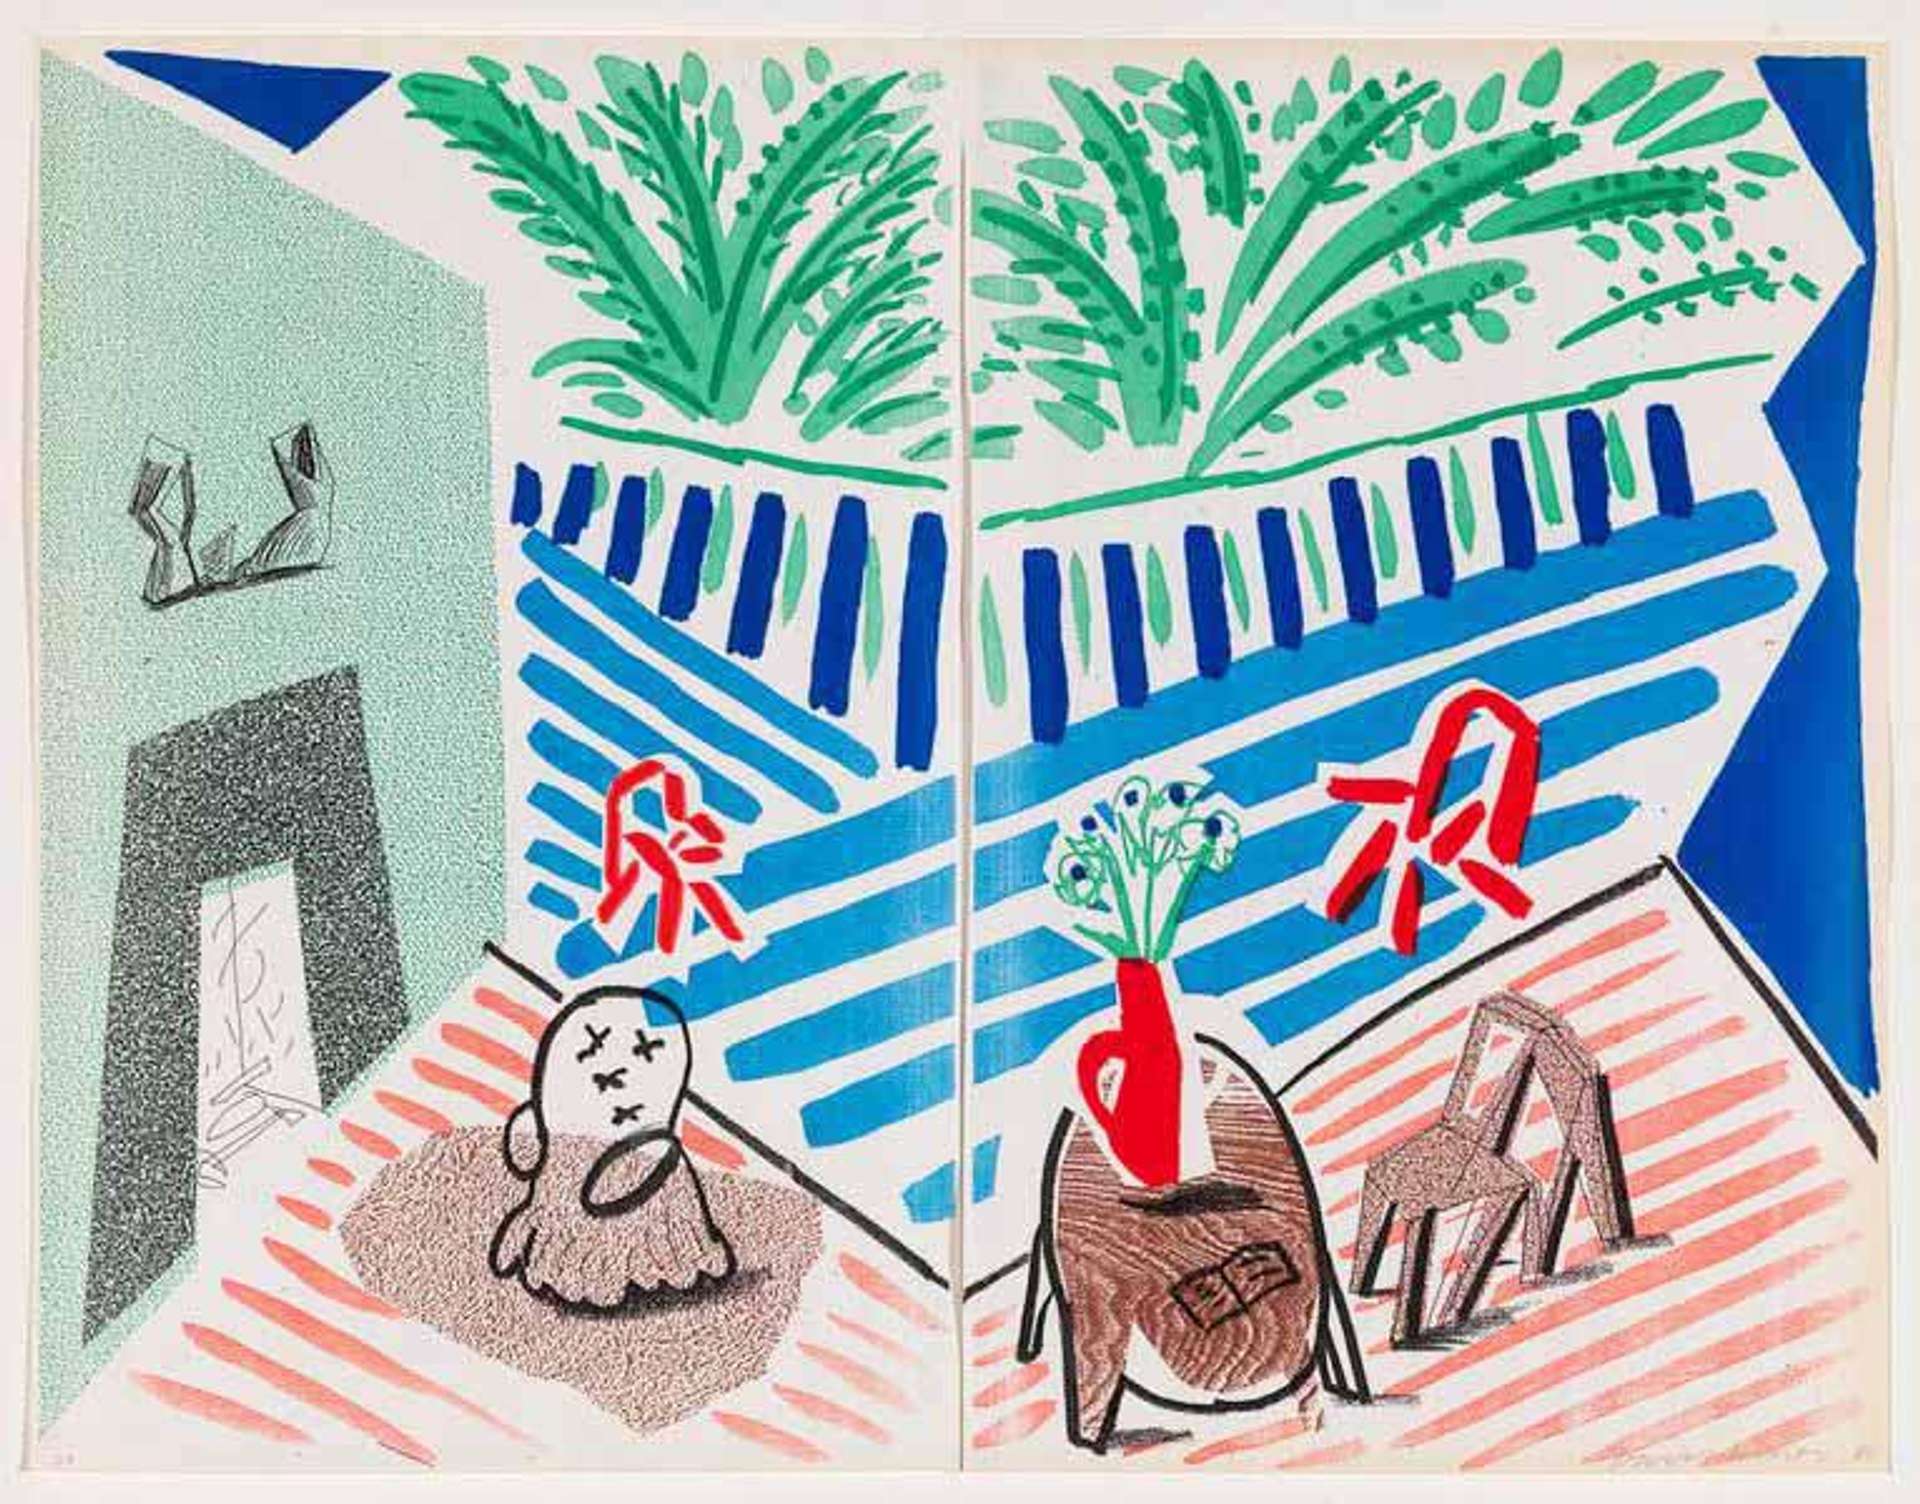 David Hockney, Technology and Perspective